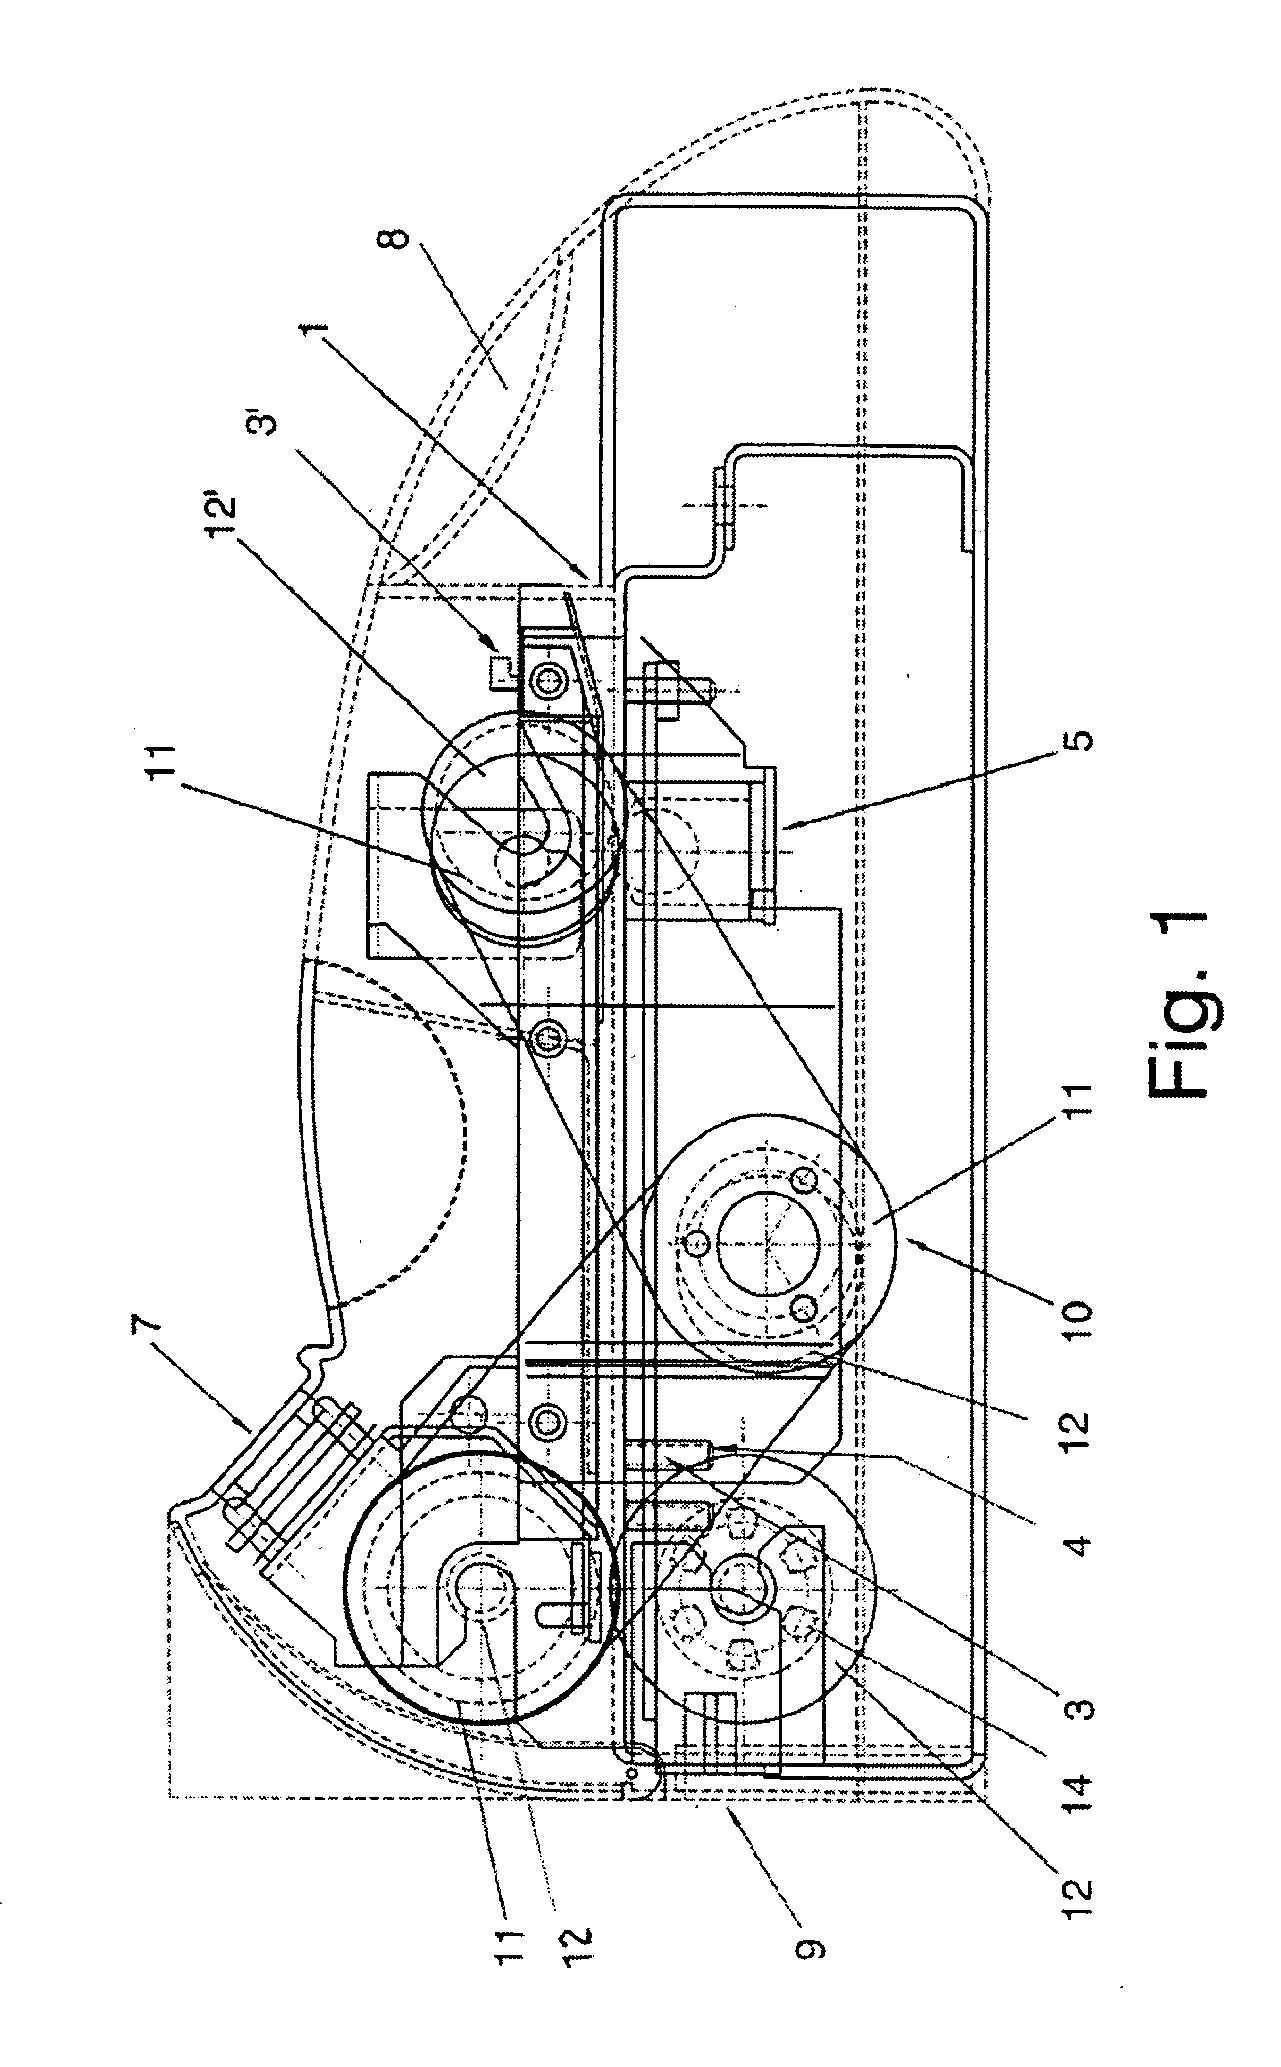 System for recognizing and validating banknotes